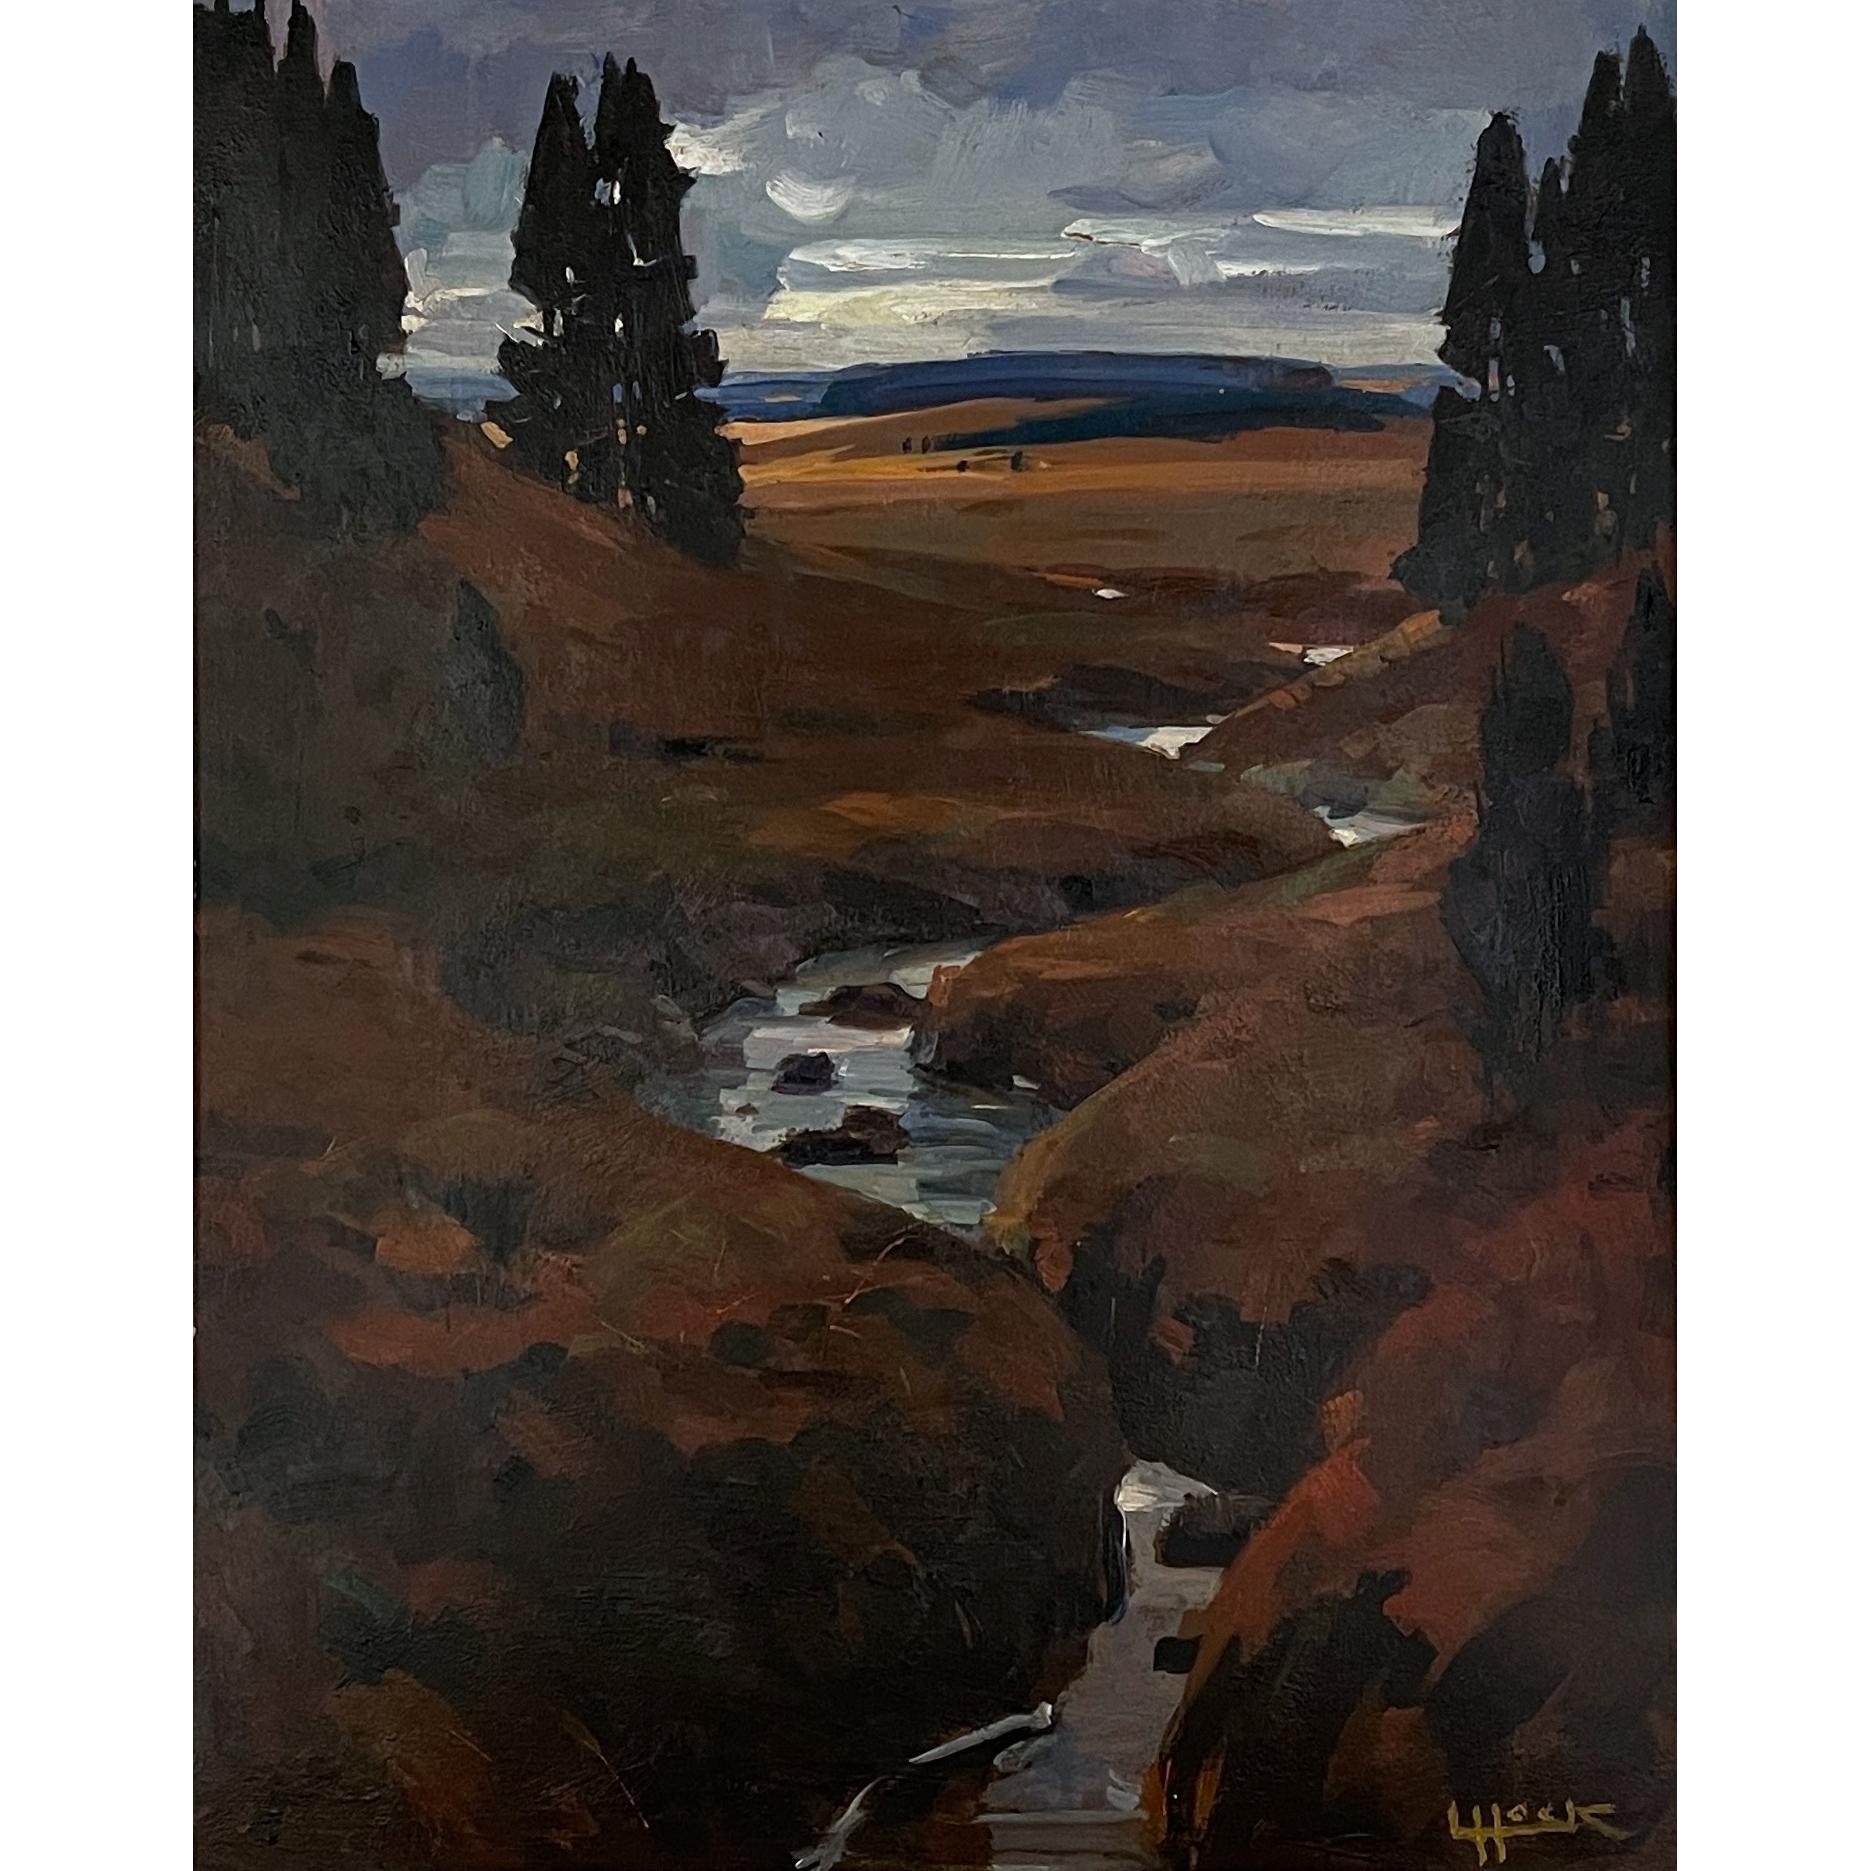 Framed oil painting on panel by Lucien Hock (1899-1972) is a splendid composition capturing the natural beauty of the 